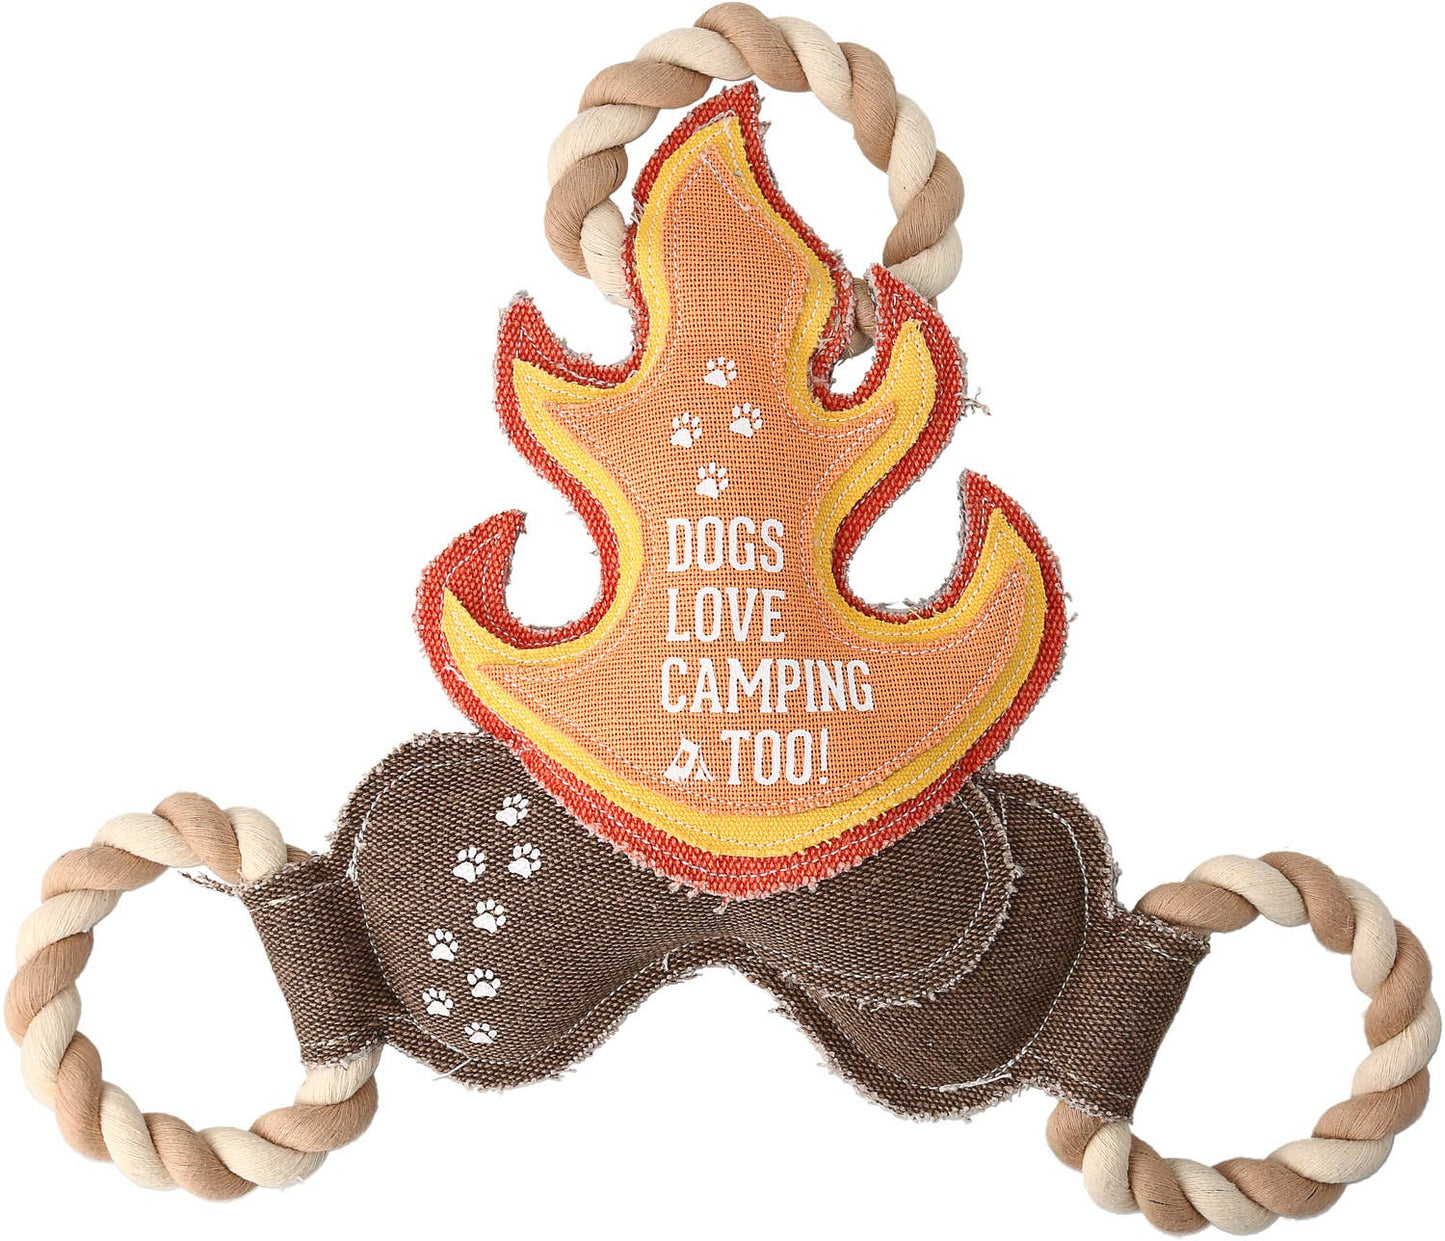 Camping Dog - 12" Canvas Dog Toy on Rope